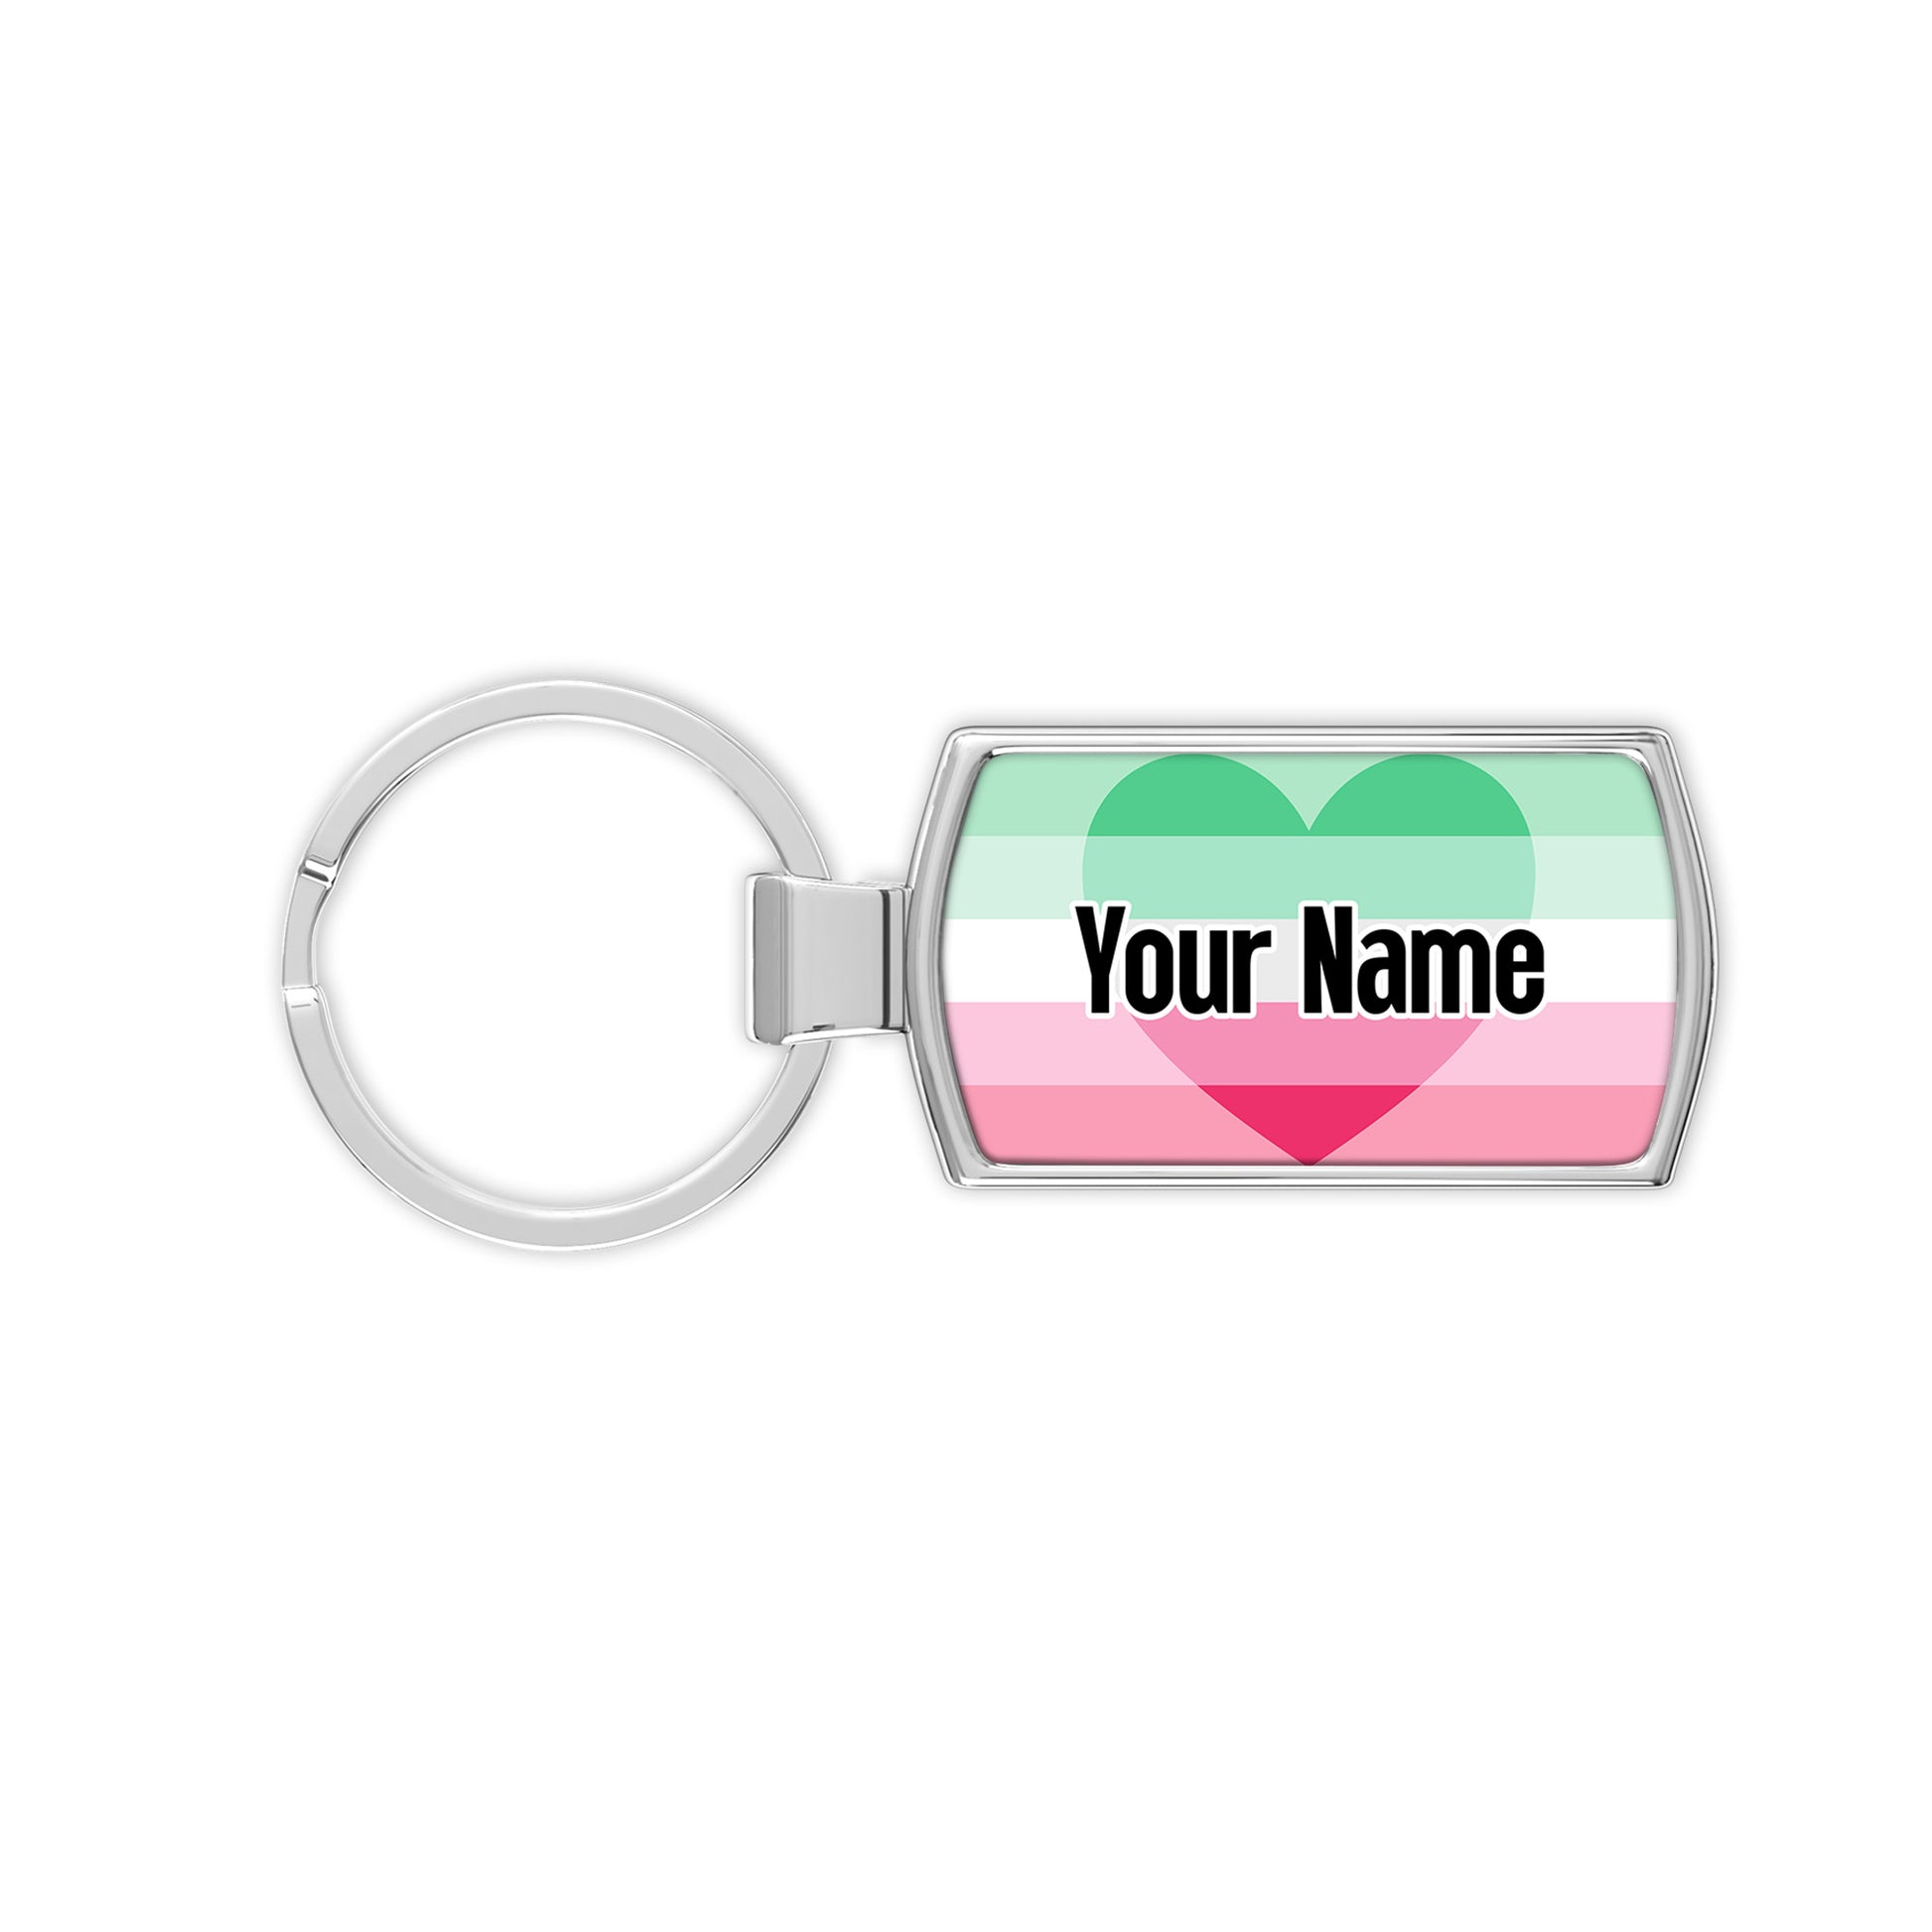 Abroromantic pride flag metal keyring personalised with your name